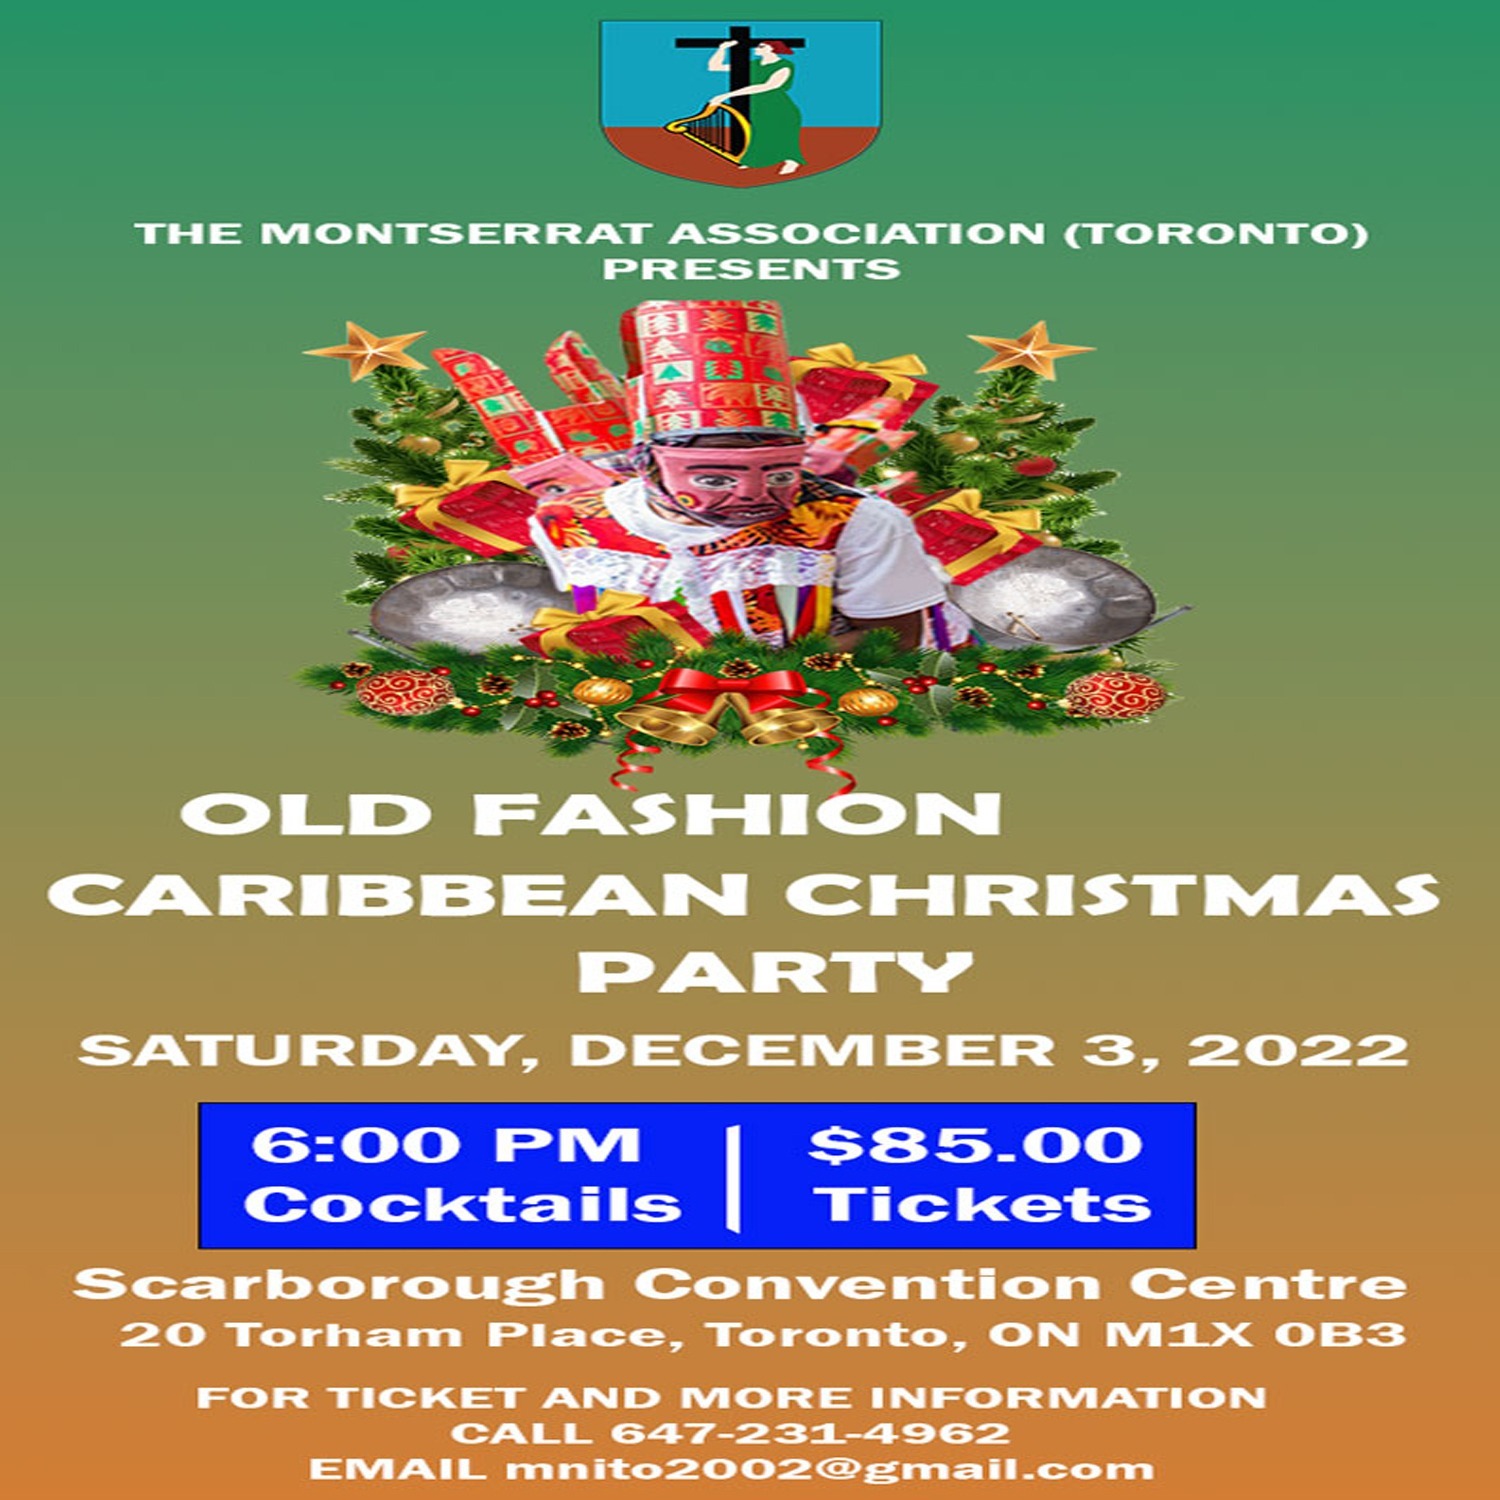 OLD FASHION CARIBBEAN CHRISTMAS PARTY